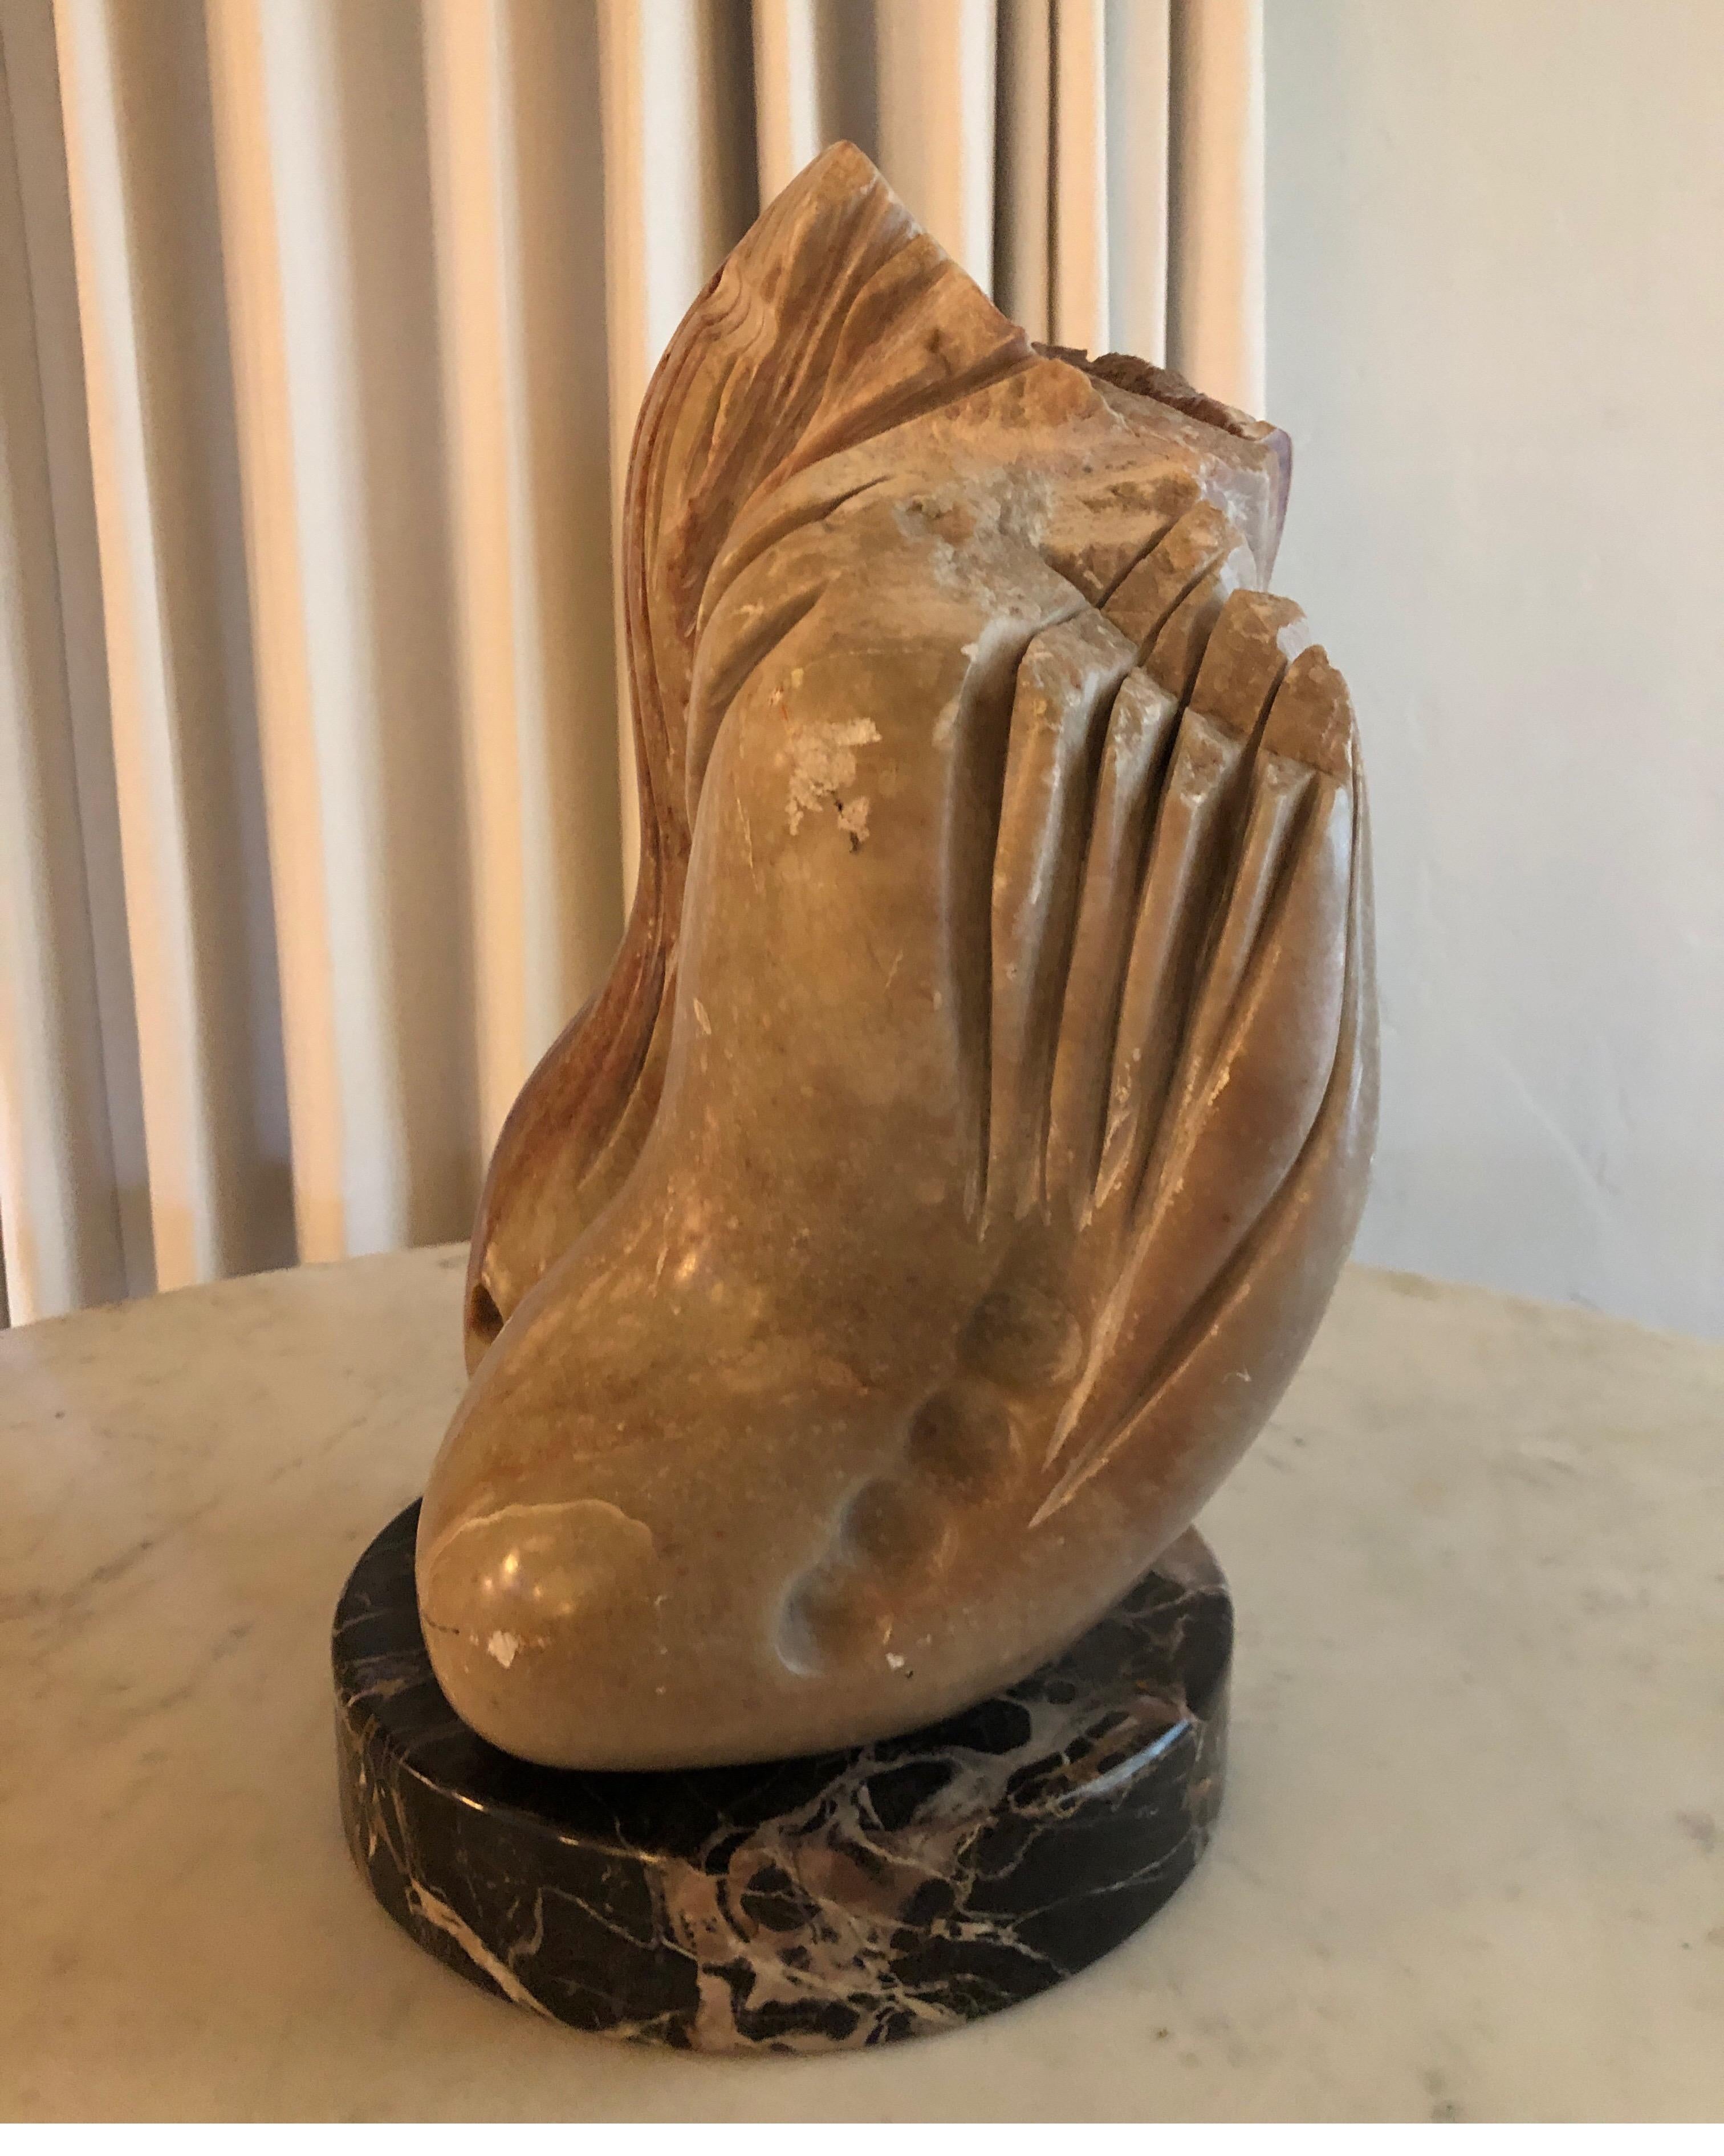 Yehuda Dodd Roth Signed Stone Sculpture, 1980s In Good Condition For Sale In Los Angeles, CA